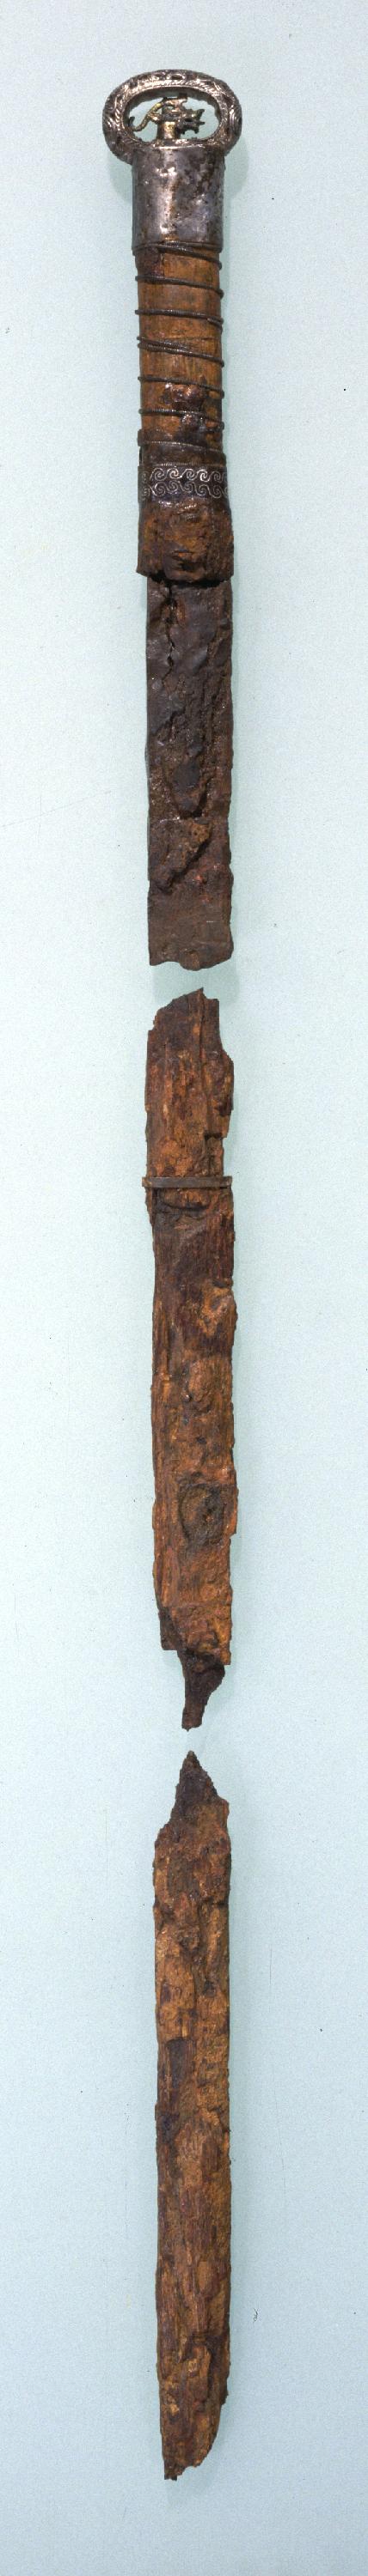 Image of "Sword with a Ring-Shaped Pommel and an Inscription"